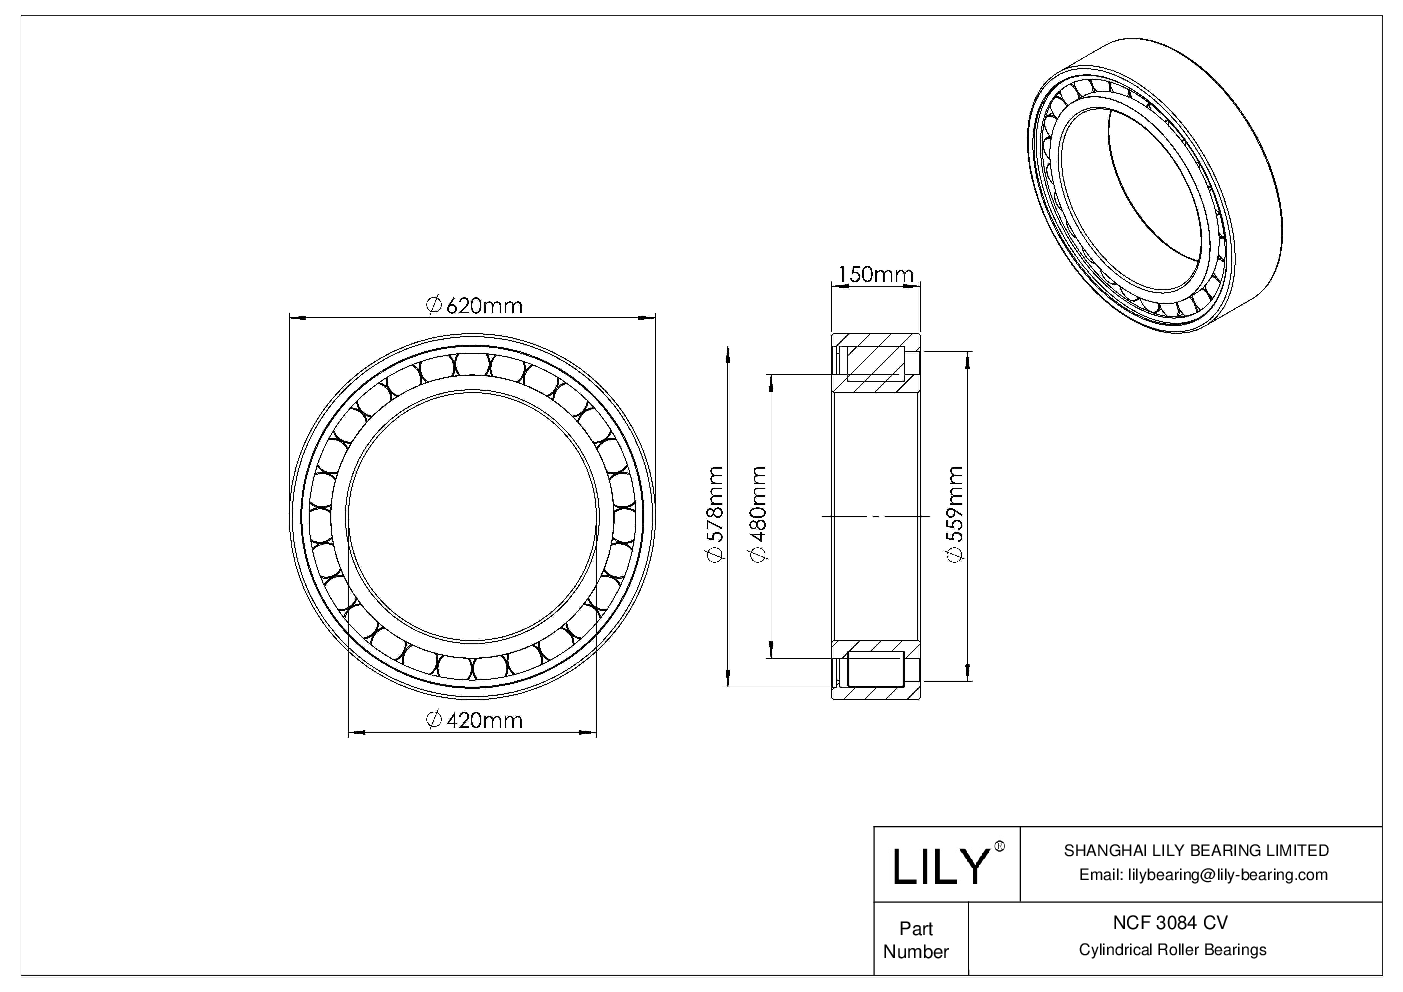 NCF 3084 CV Single Row Full Complement Cylindrical Roller Bearings cad drawing